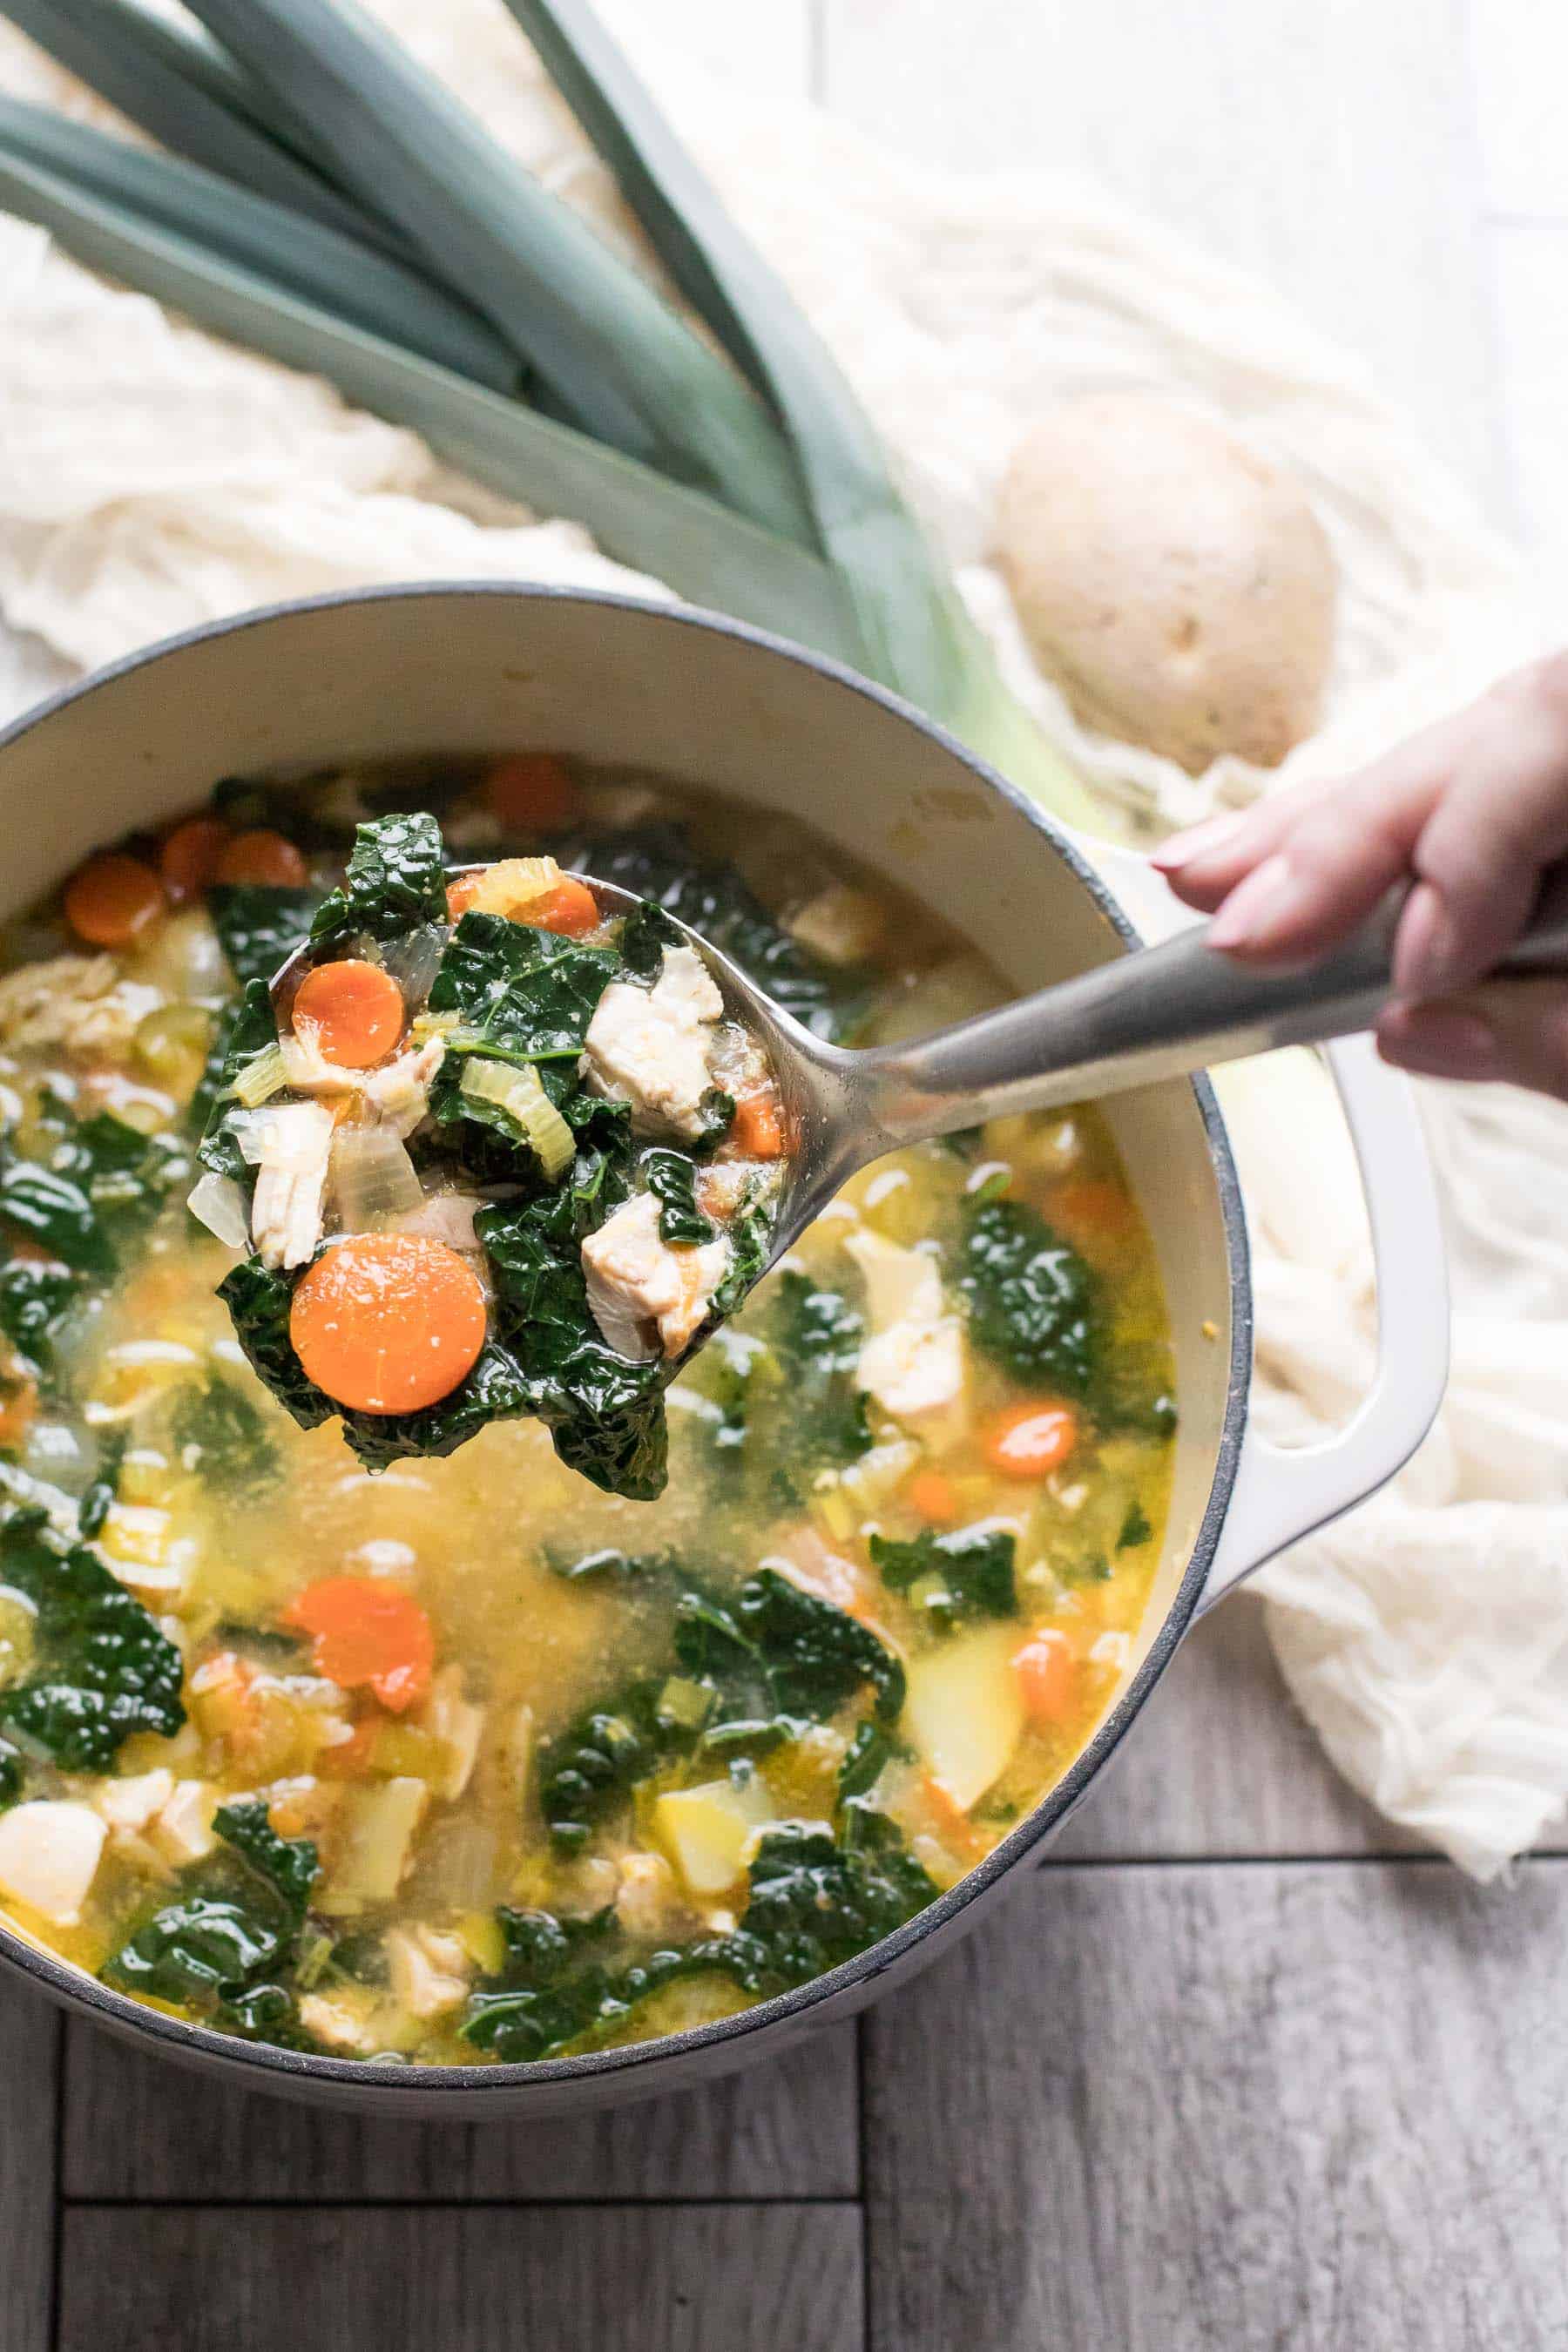 Paleo & Whole30 Potato, Leek & Chicken Soup with Kale - a healthy and flavorful detox soup recipe. Gluten free, grain free, sugar free, dairy free, clean eating.